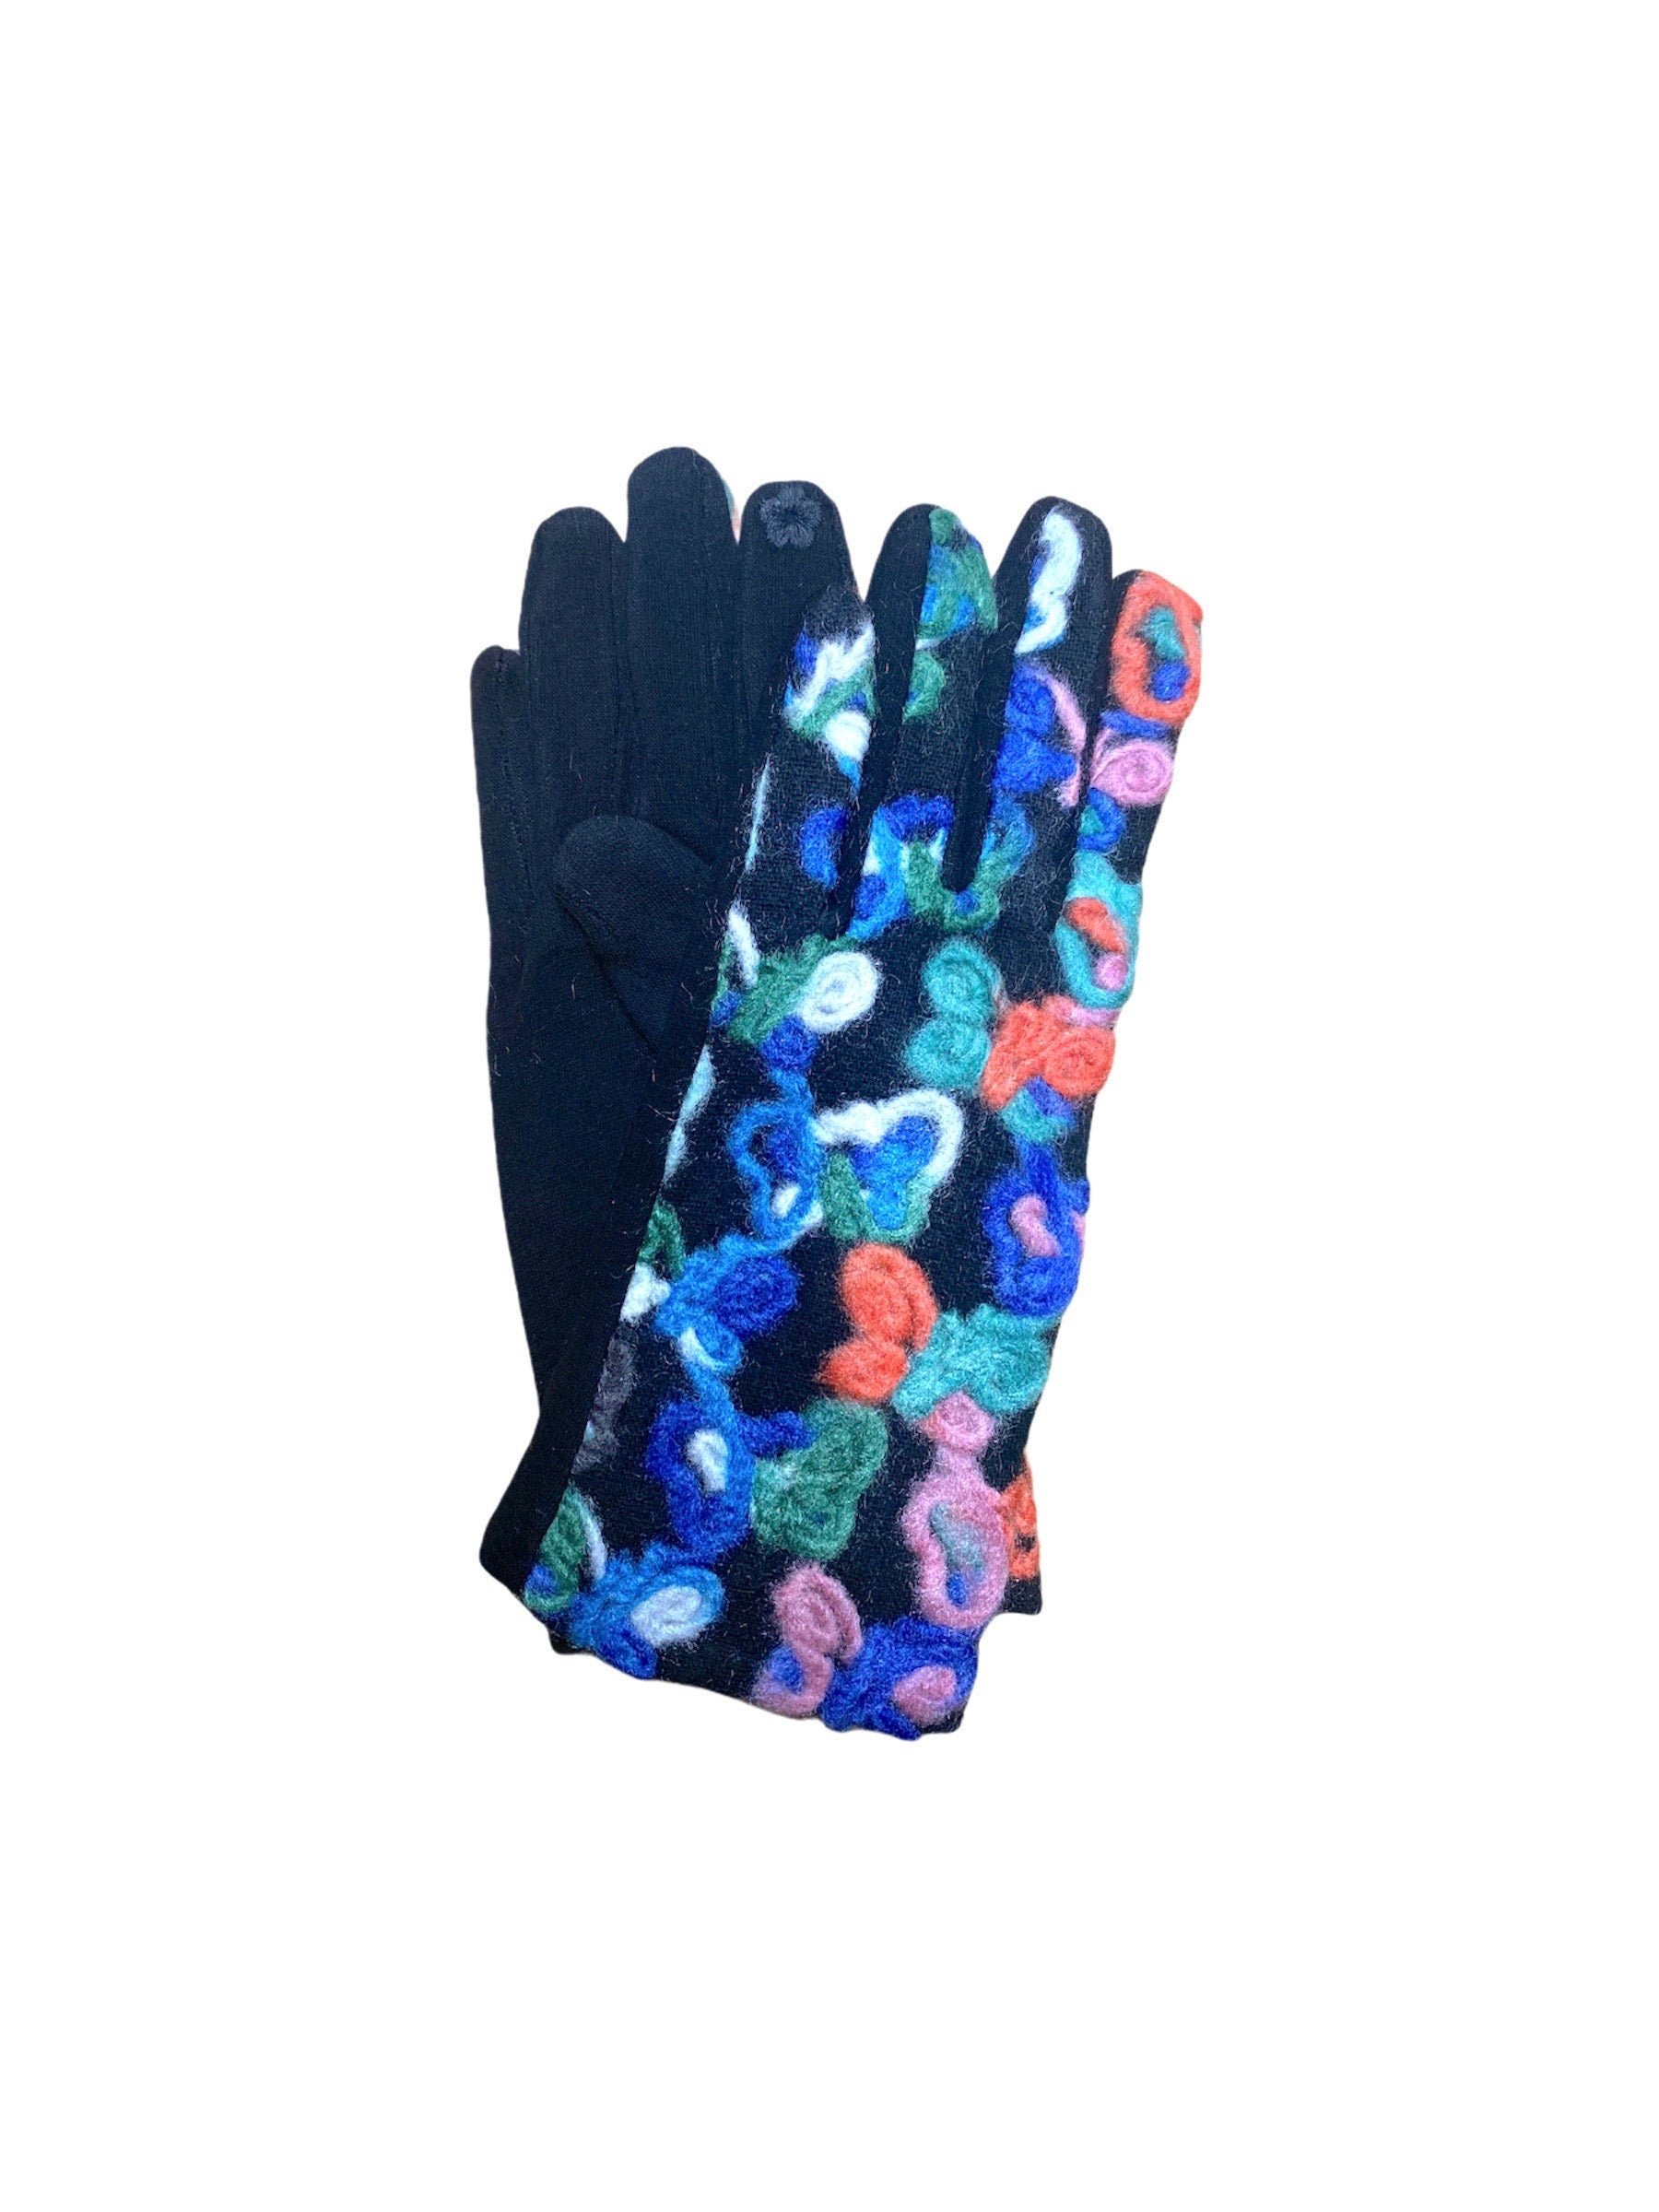 PACK OF 12 - Tactile gloves with moumoute pattern